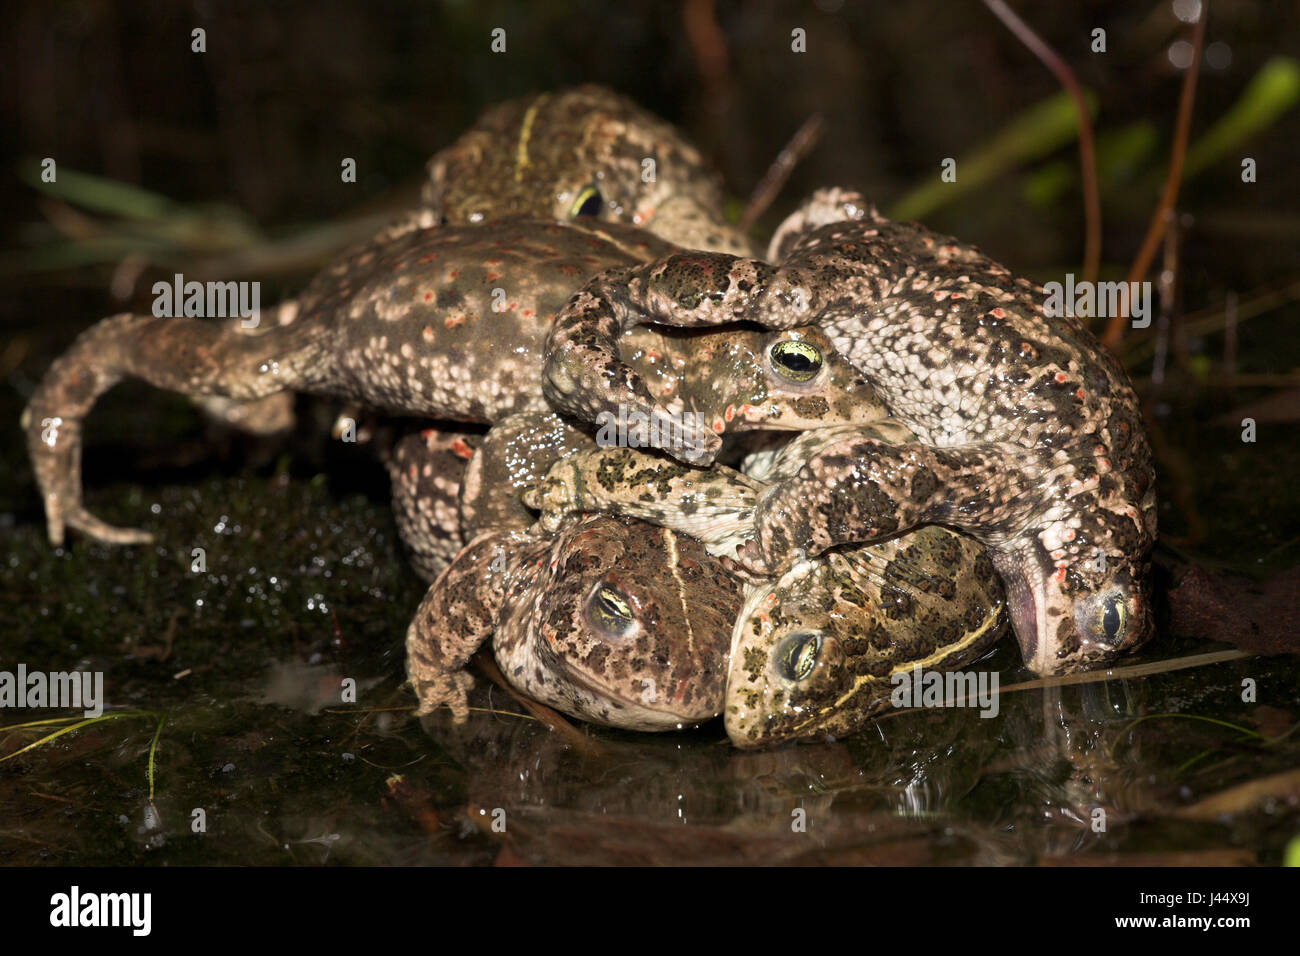 four male natterjack toads are fighting to mate with a female natterjack toad (under the males) Stock Photo